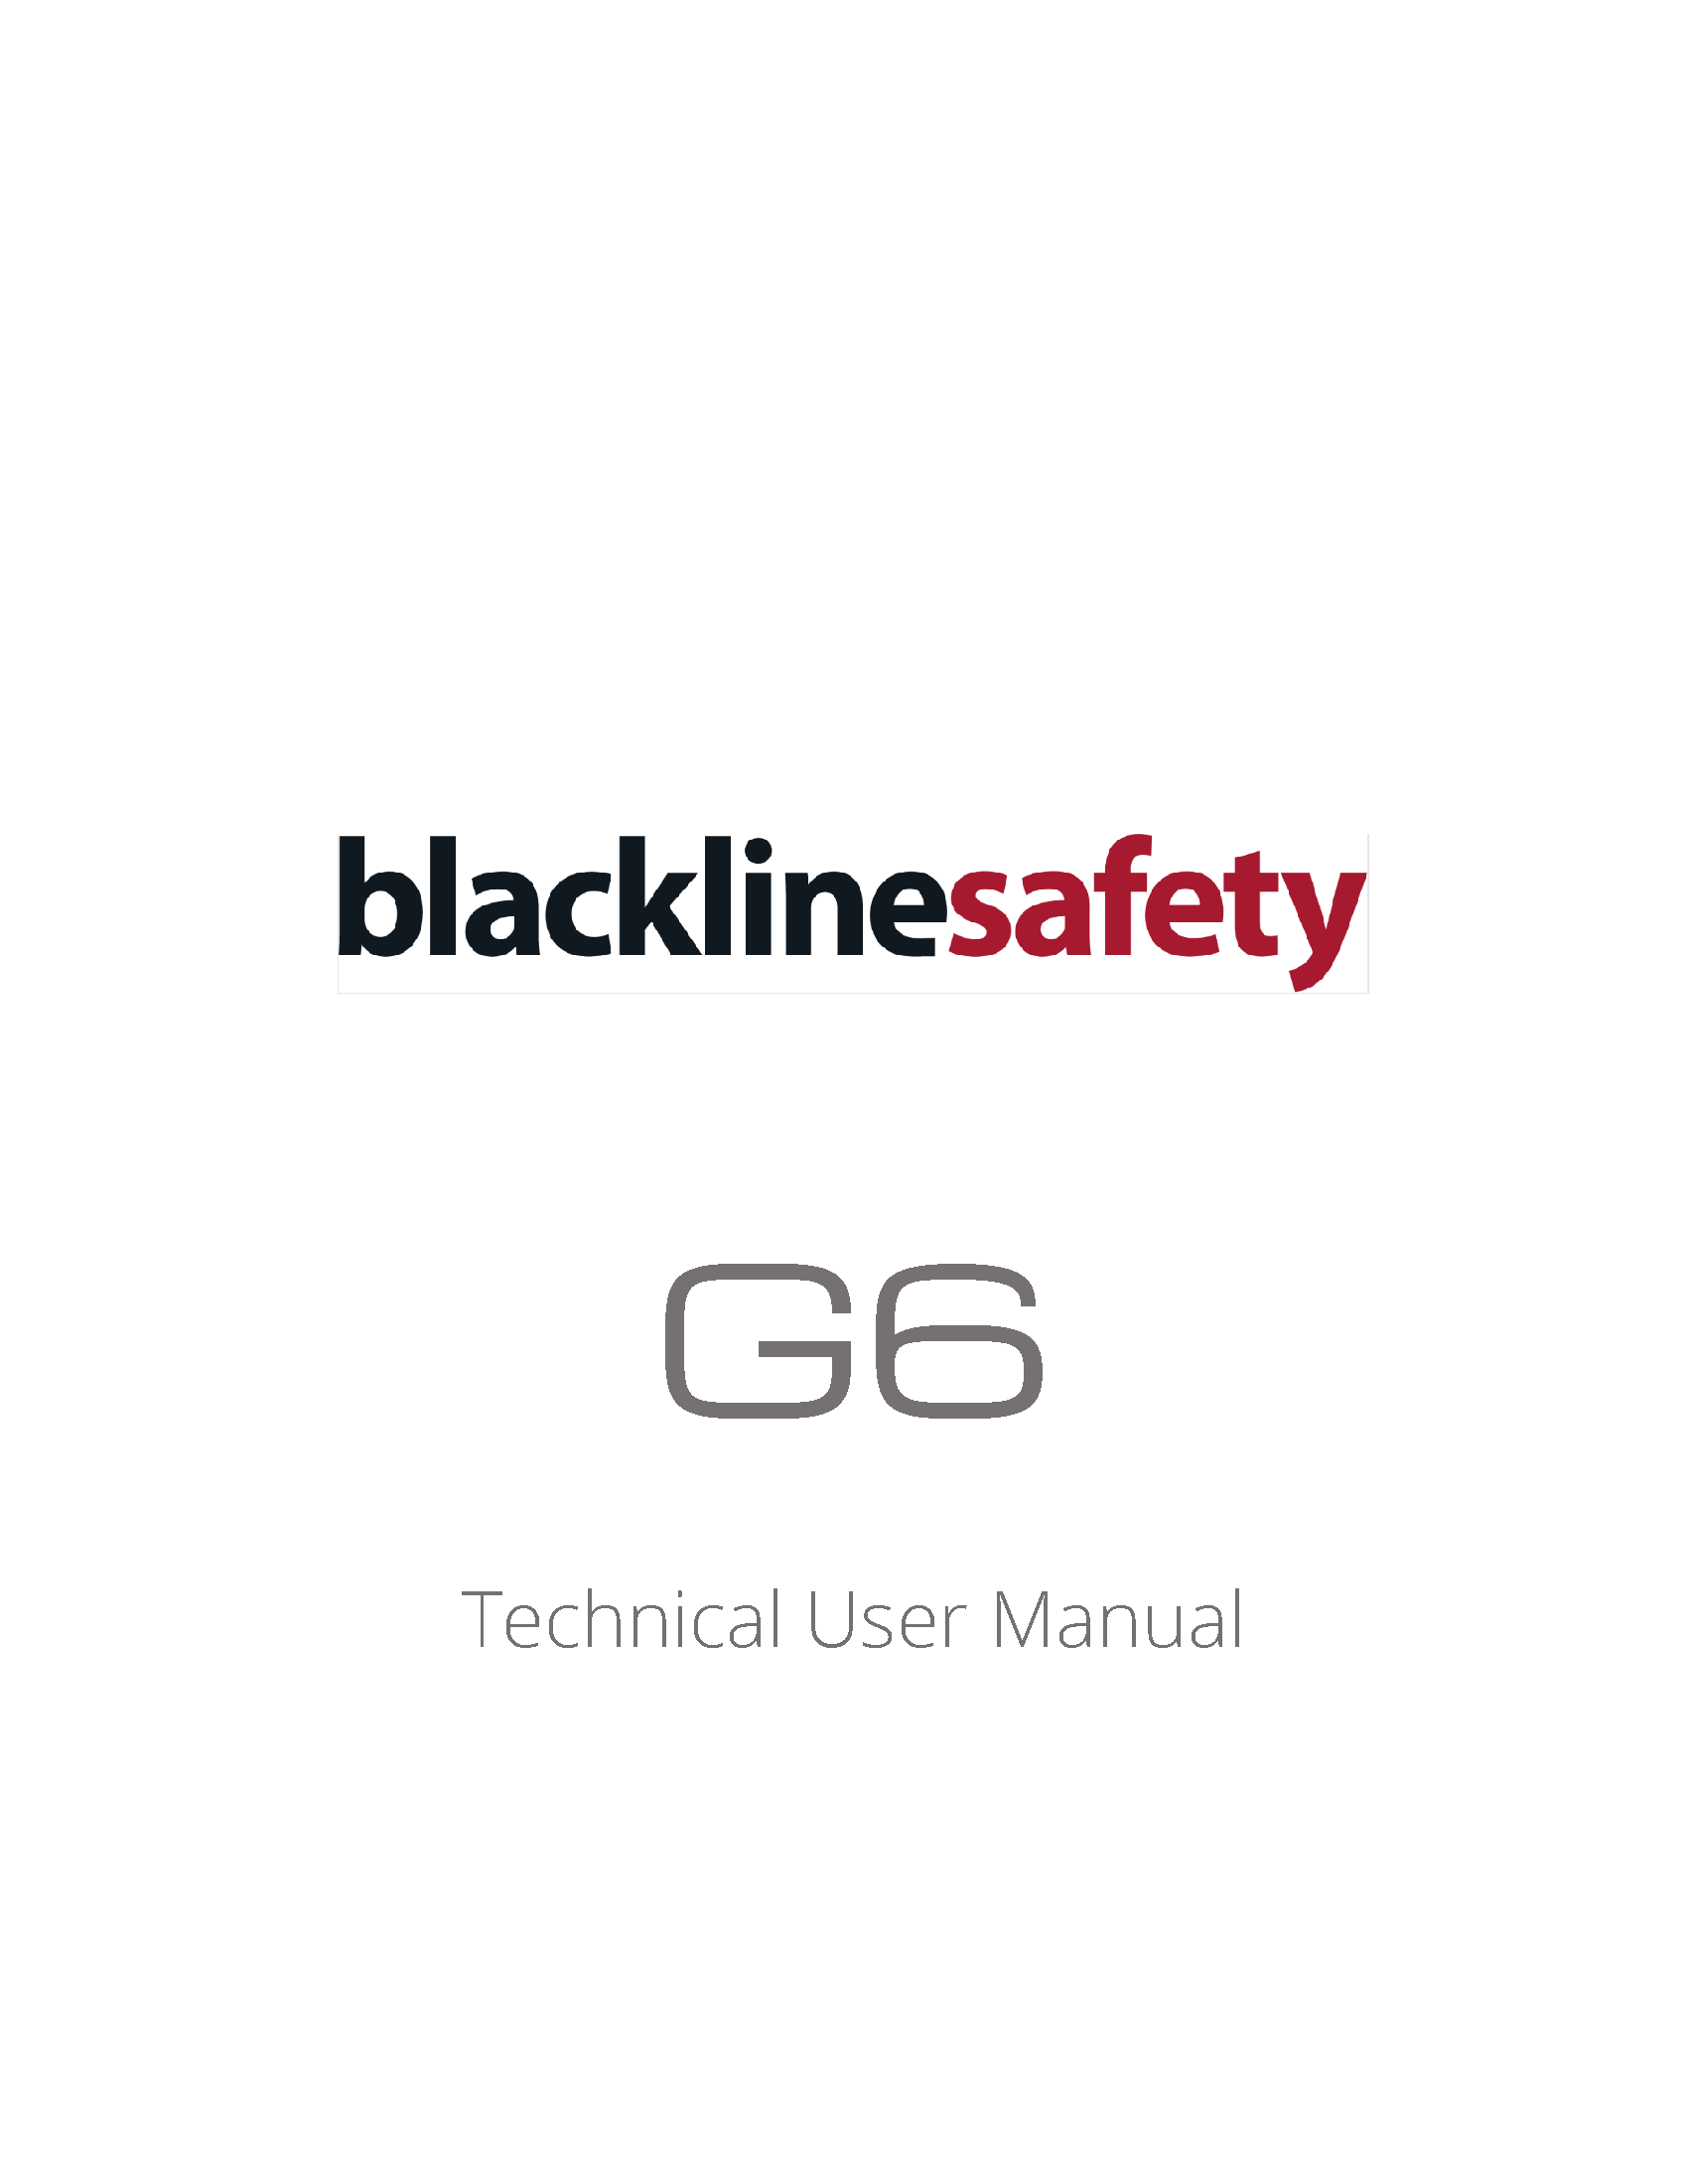 G6 Technical User Manual_R1 - EN - Cover Page